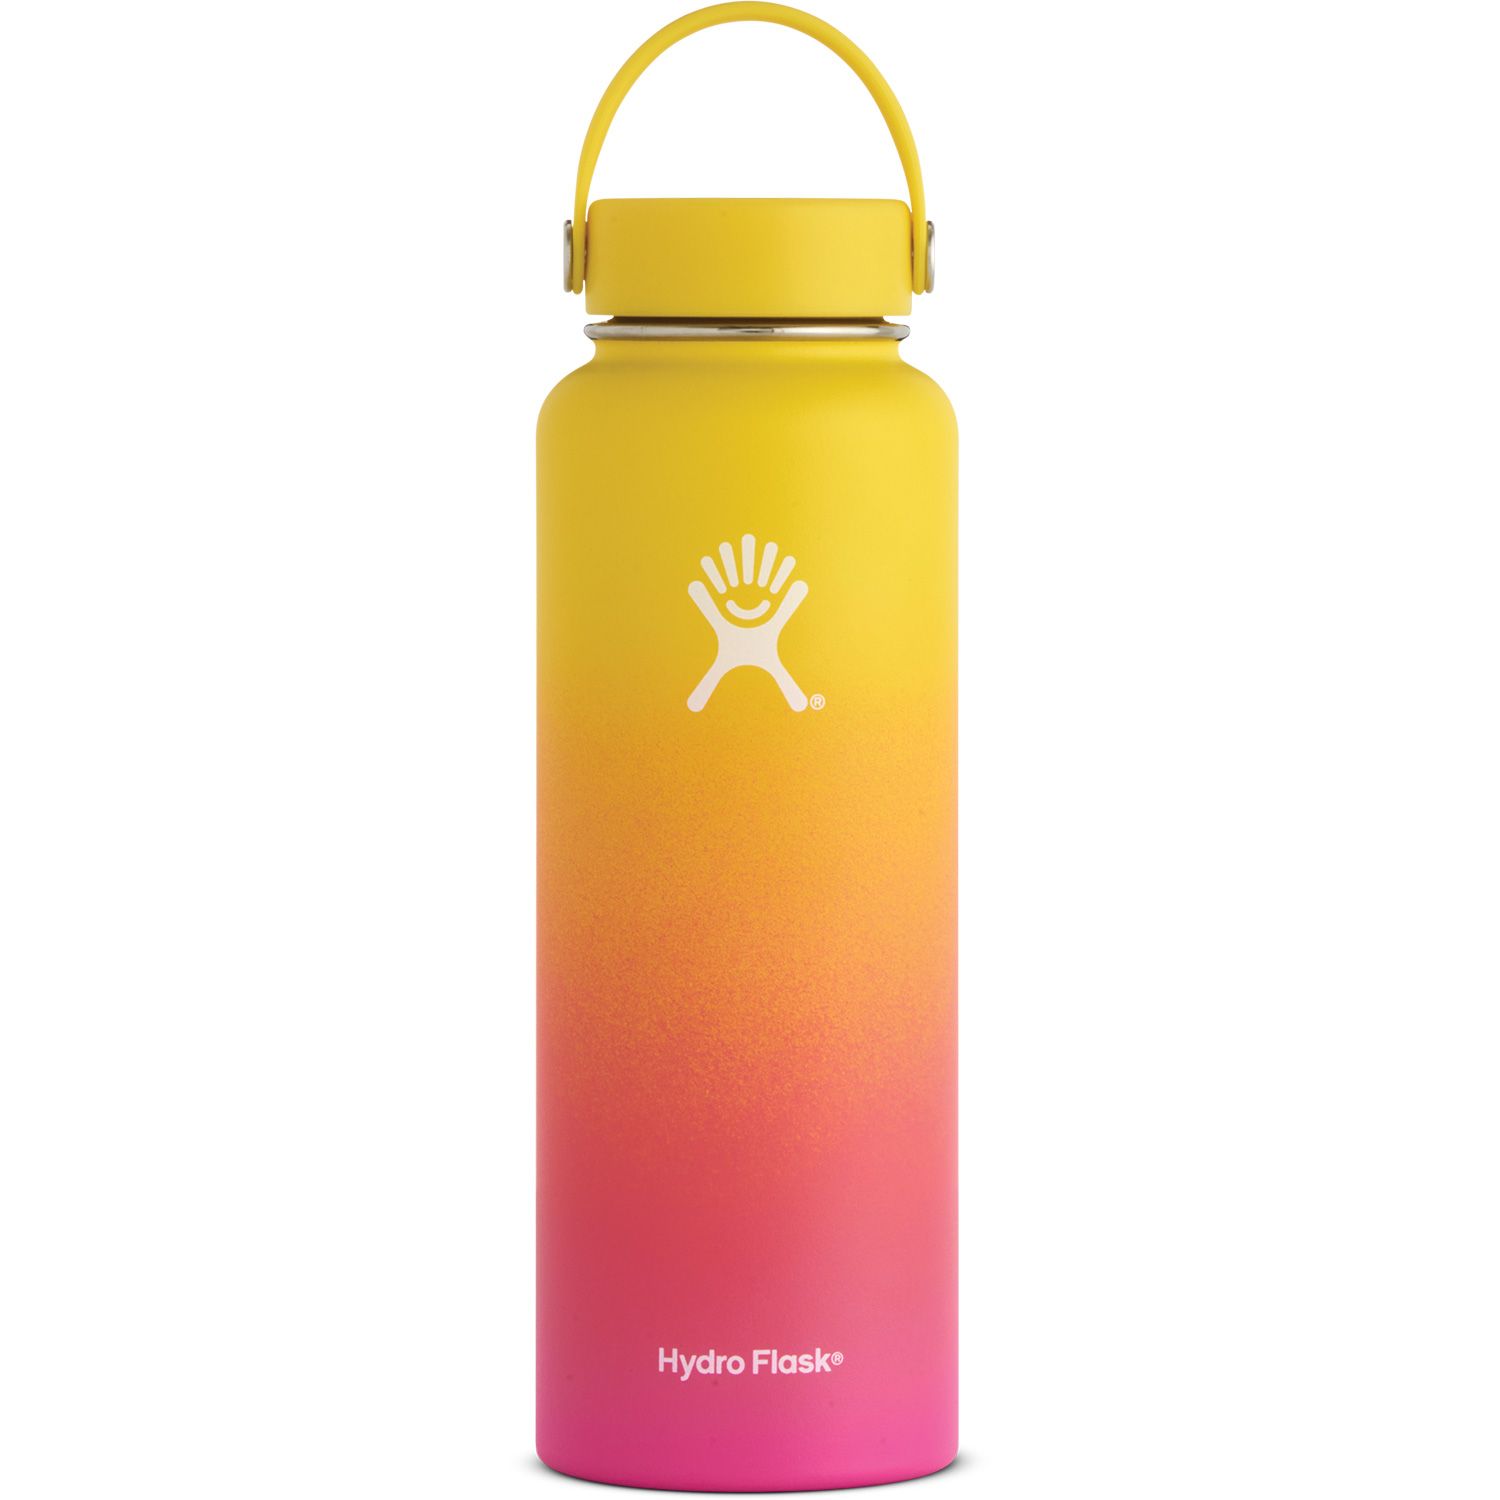 yellow ombre hydro flask